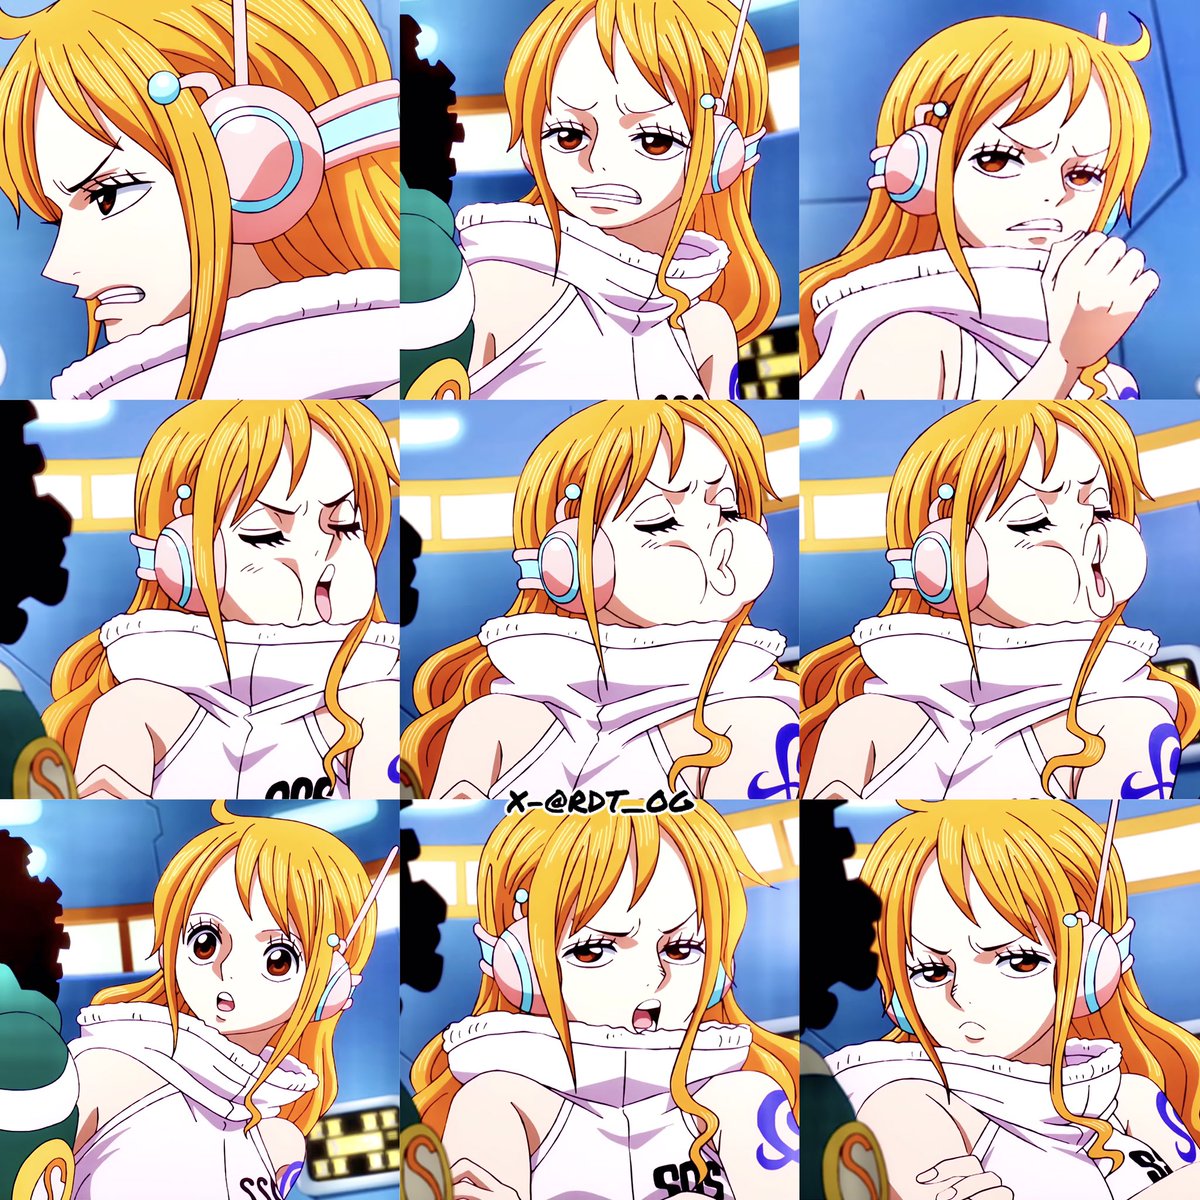 Queen of Expression too 😂

#NAMI 
#ONEPIECE